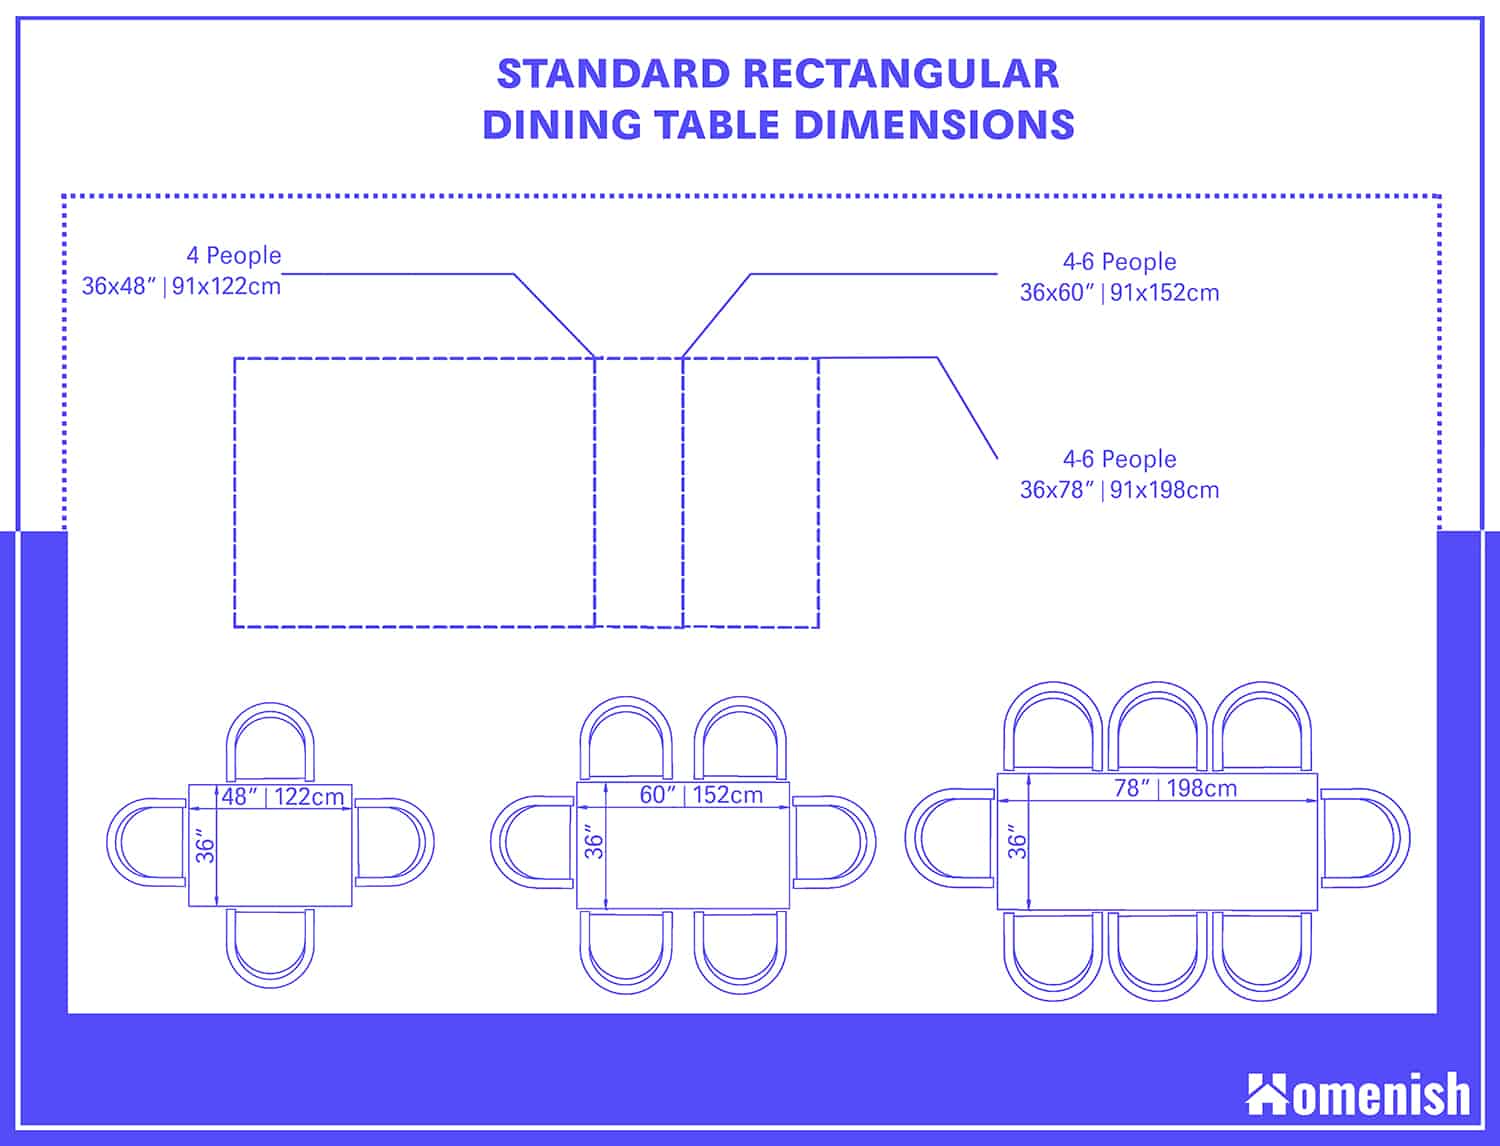 Standard Dining Table Dimensions, Standard 6 Chair Dining Table Dimensions